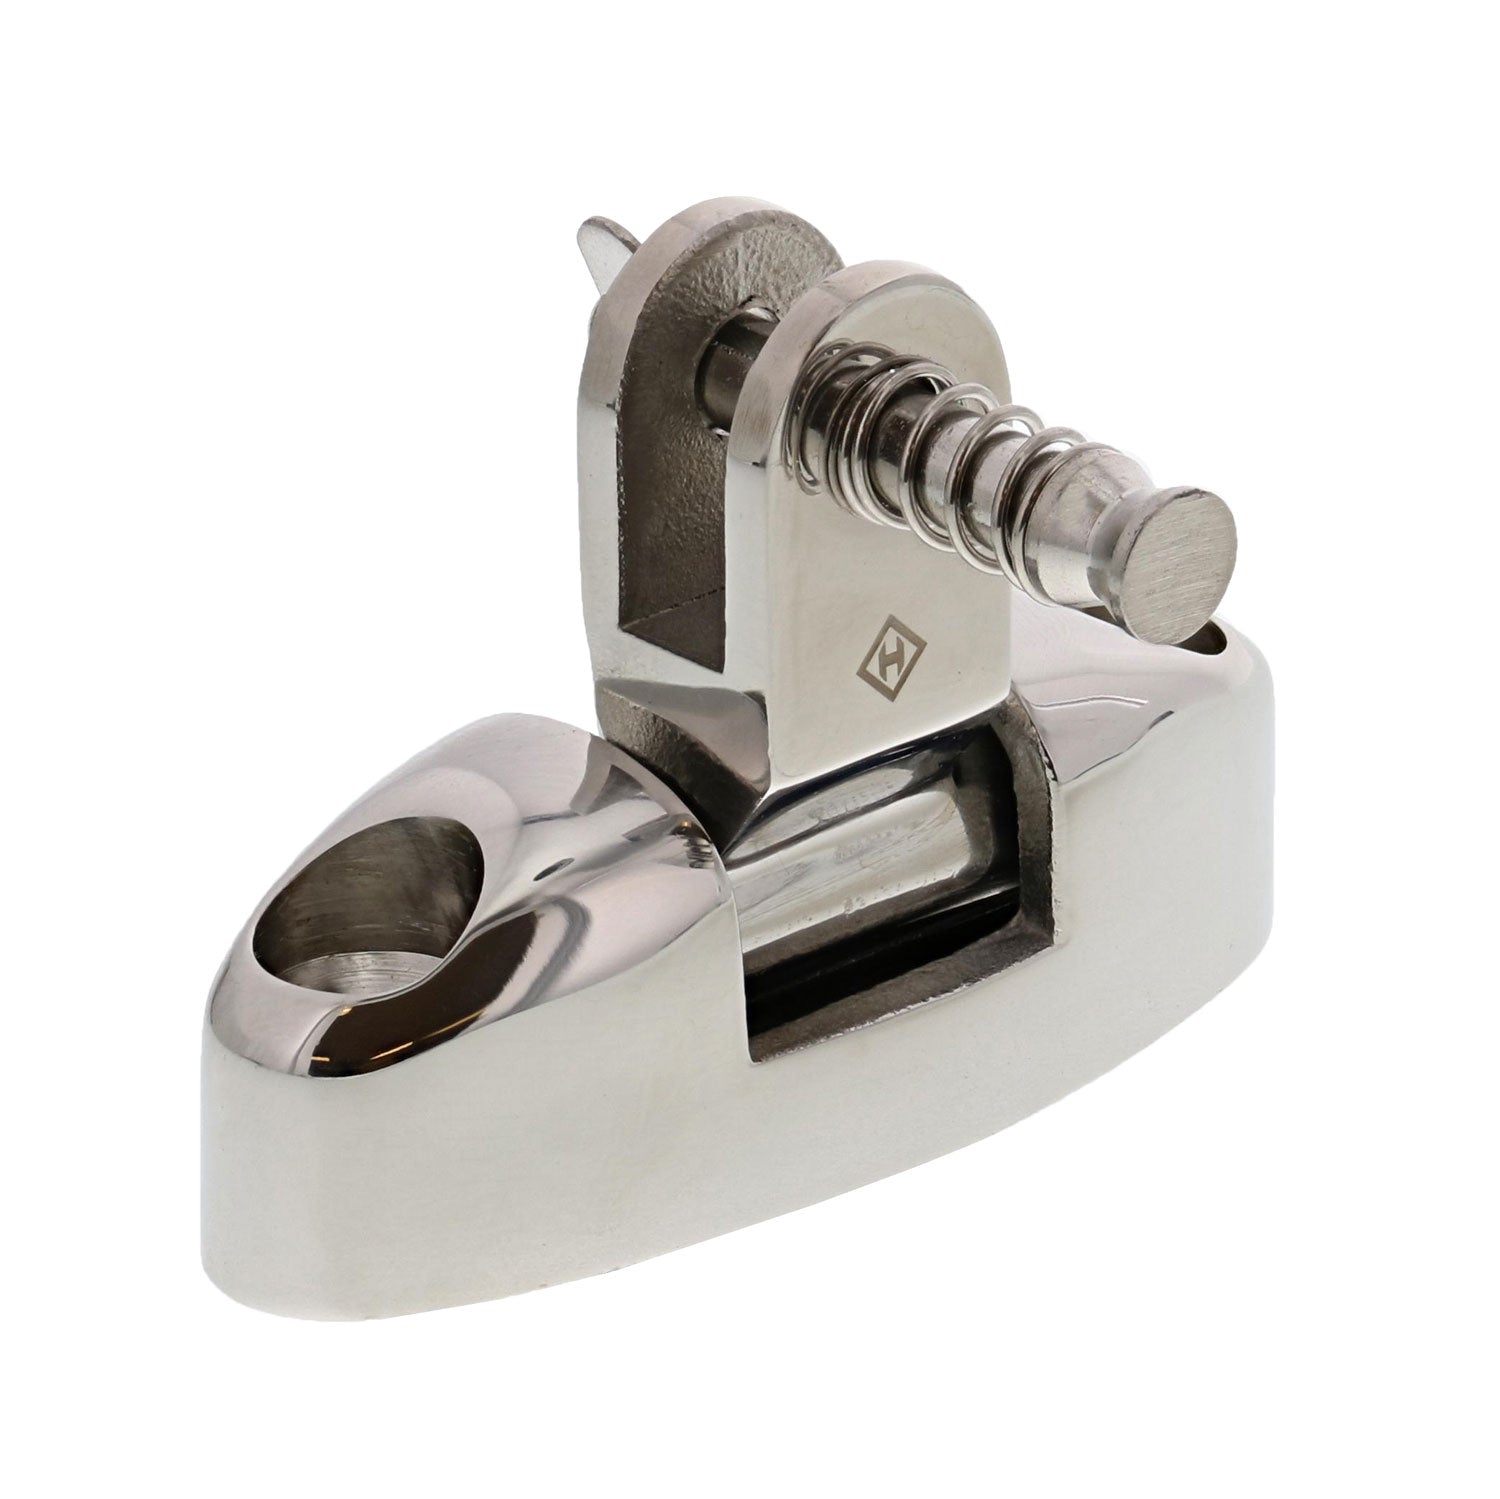 Stainless Steel Universal Swivel Deck Hinge, Removable Pin